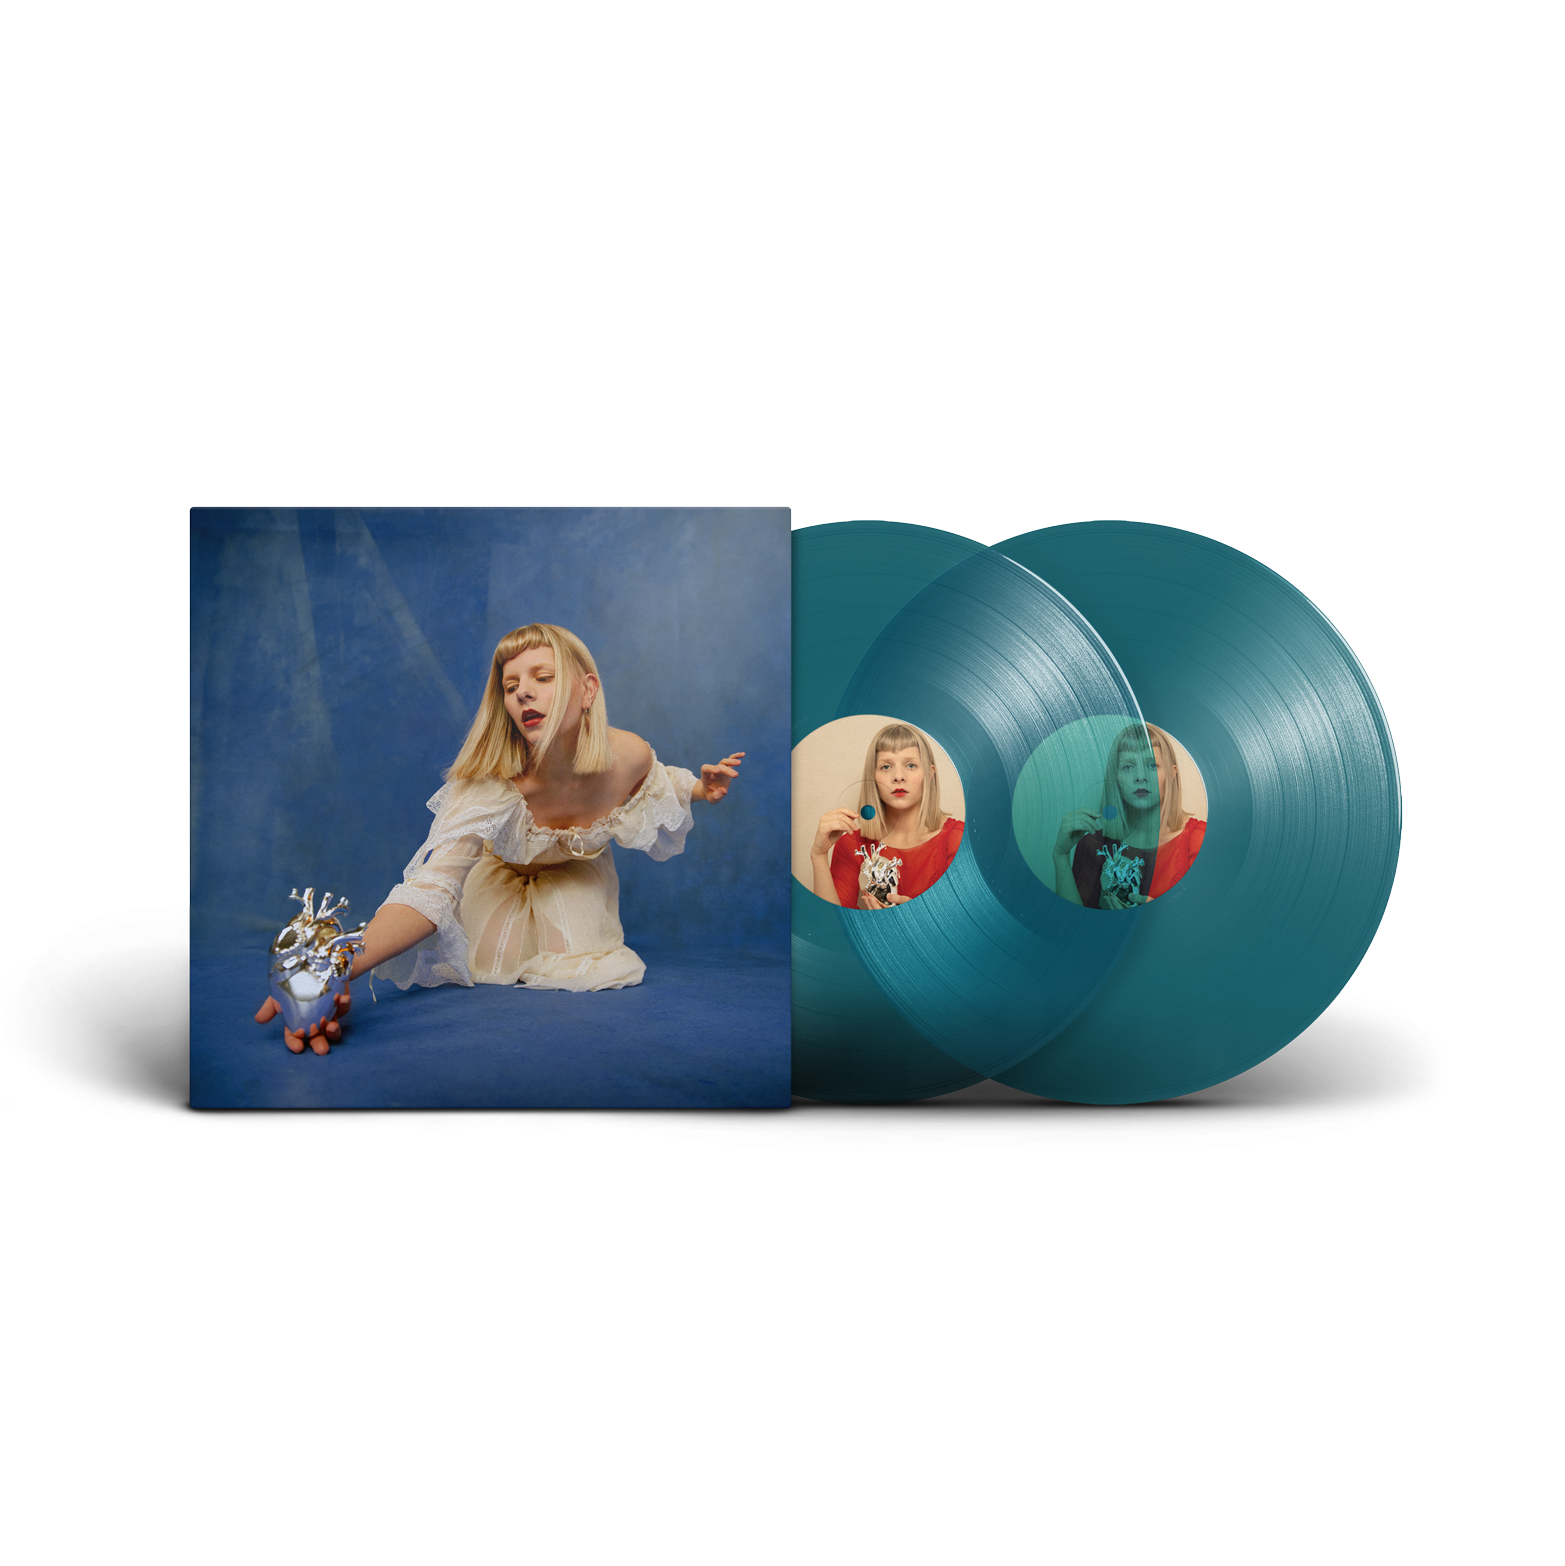 Aurora - What Happened To The Heart? (Warrior's Version) Exclusive 2LP